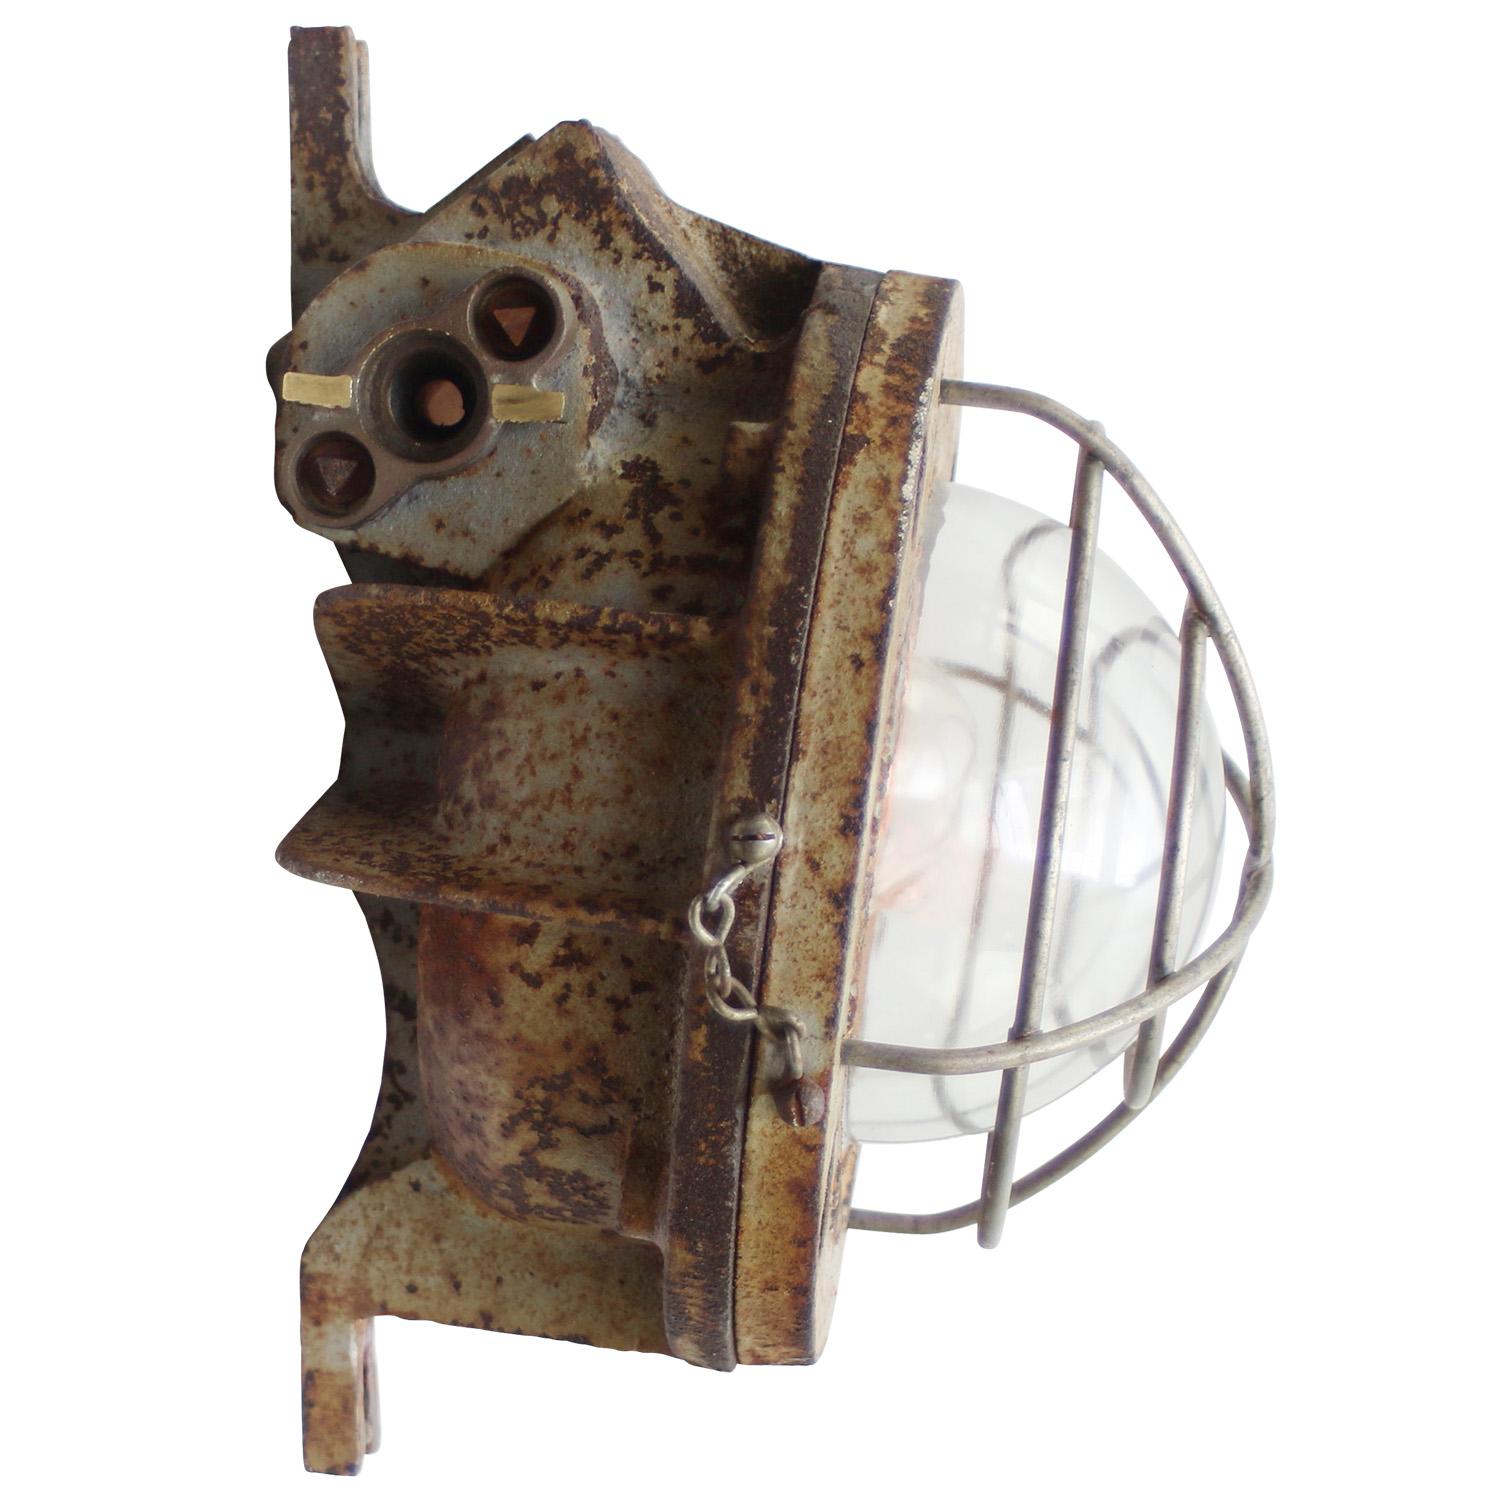 French industrial scone, cast iron wall light by Ch. & G. Grimmeisen, Paris, France
Rust brown cast iron with clear striped glass

Weight: 11.00 kg / 24.3 lb

Priced per individual item. All lamps have been made suitable by international standards